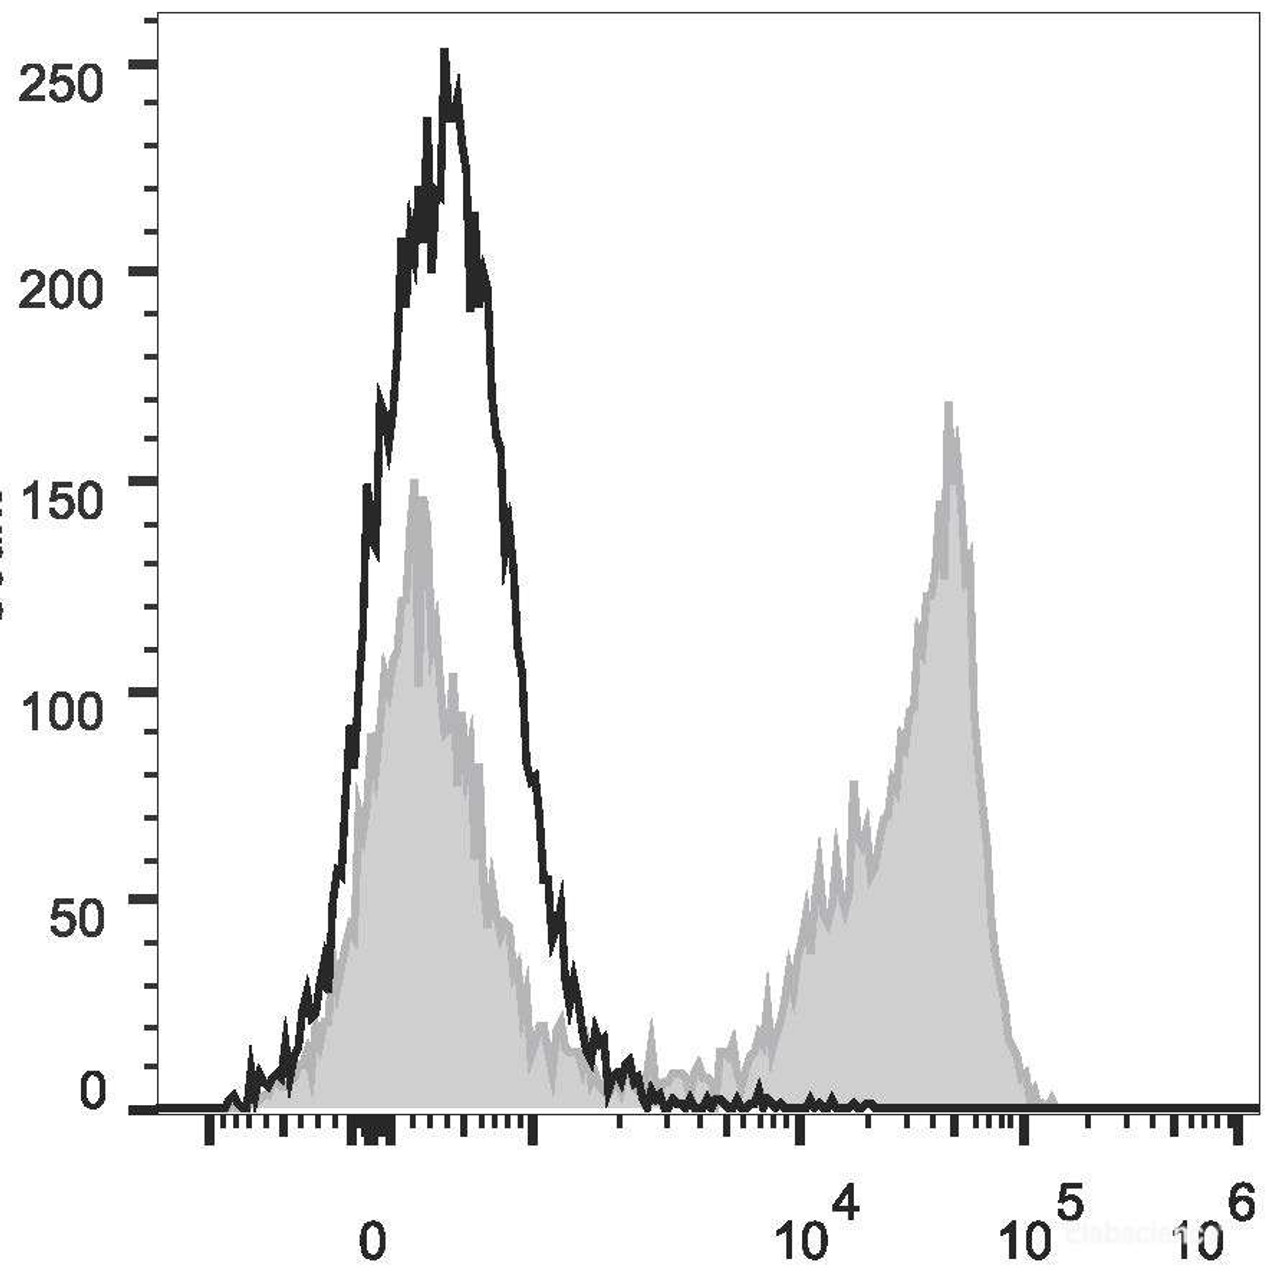 C57BL/6 murine bone marrow cells are stained with PercP Anti-Mouse Ly-6G/Ly-6C (Gr-1) Antibody(filled gray histogram). Unstained bone marrow cells (empty black histogram) are used as control.